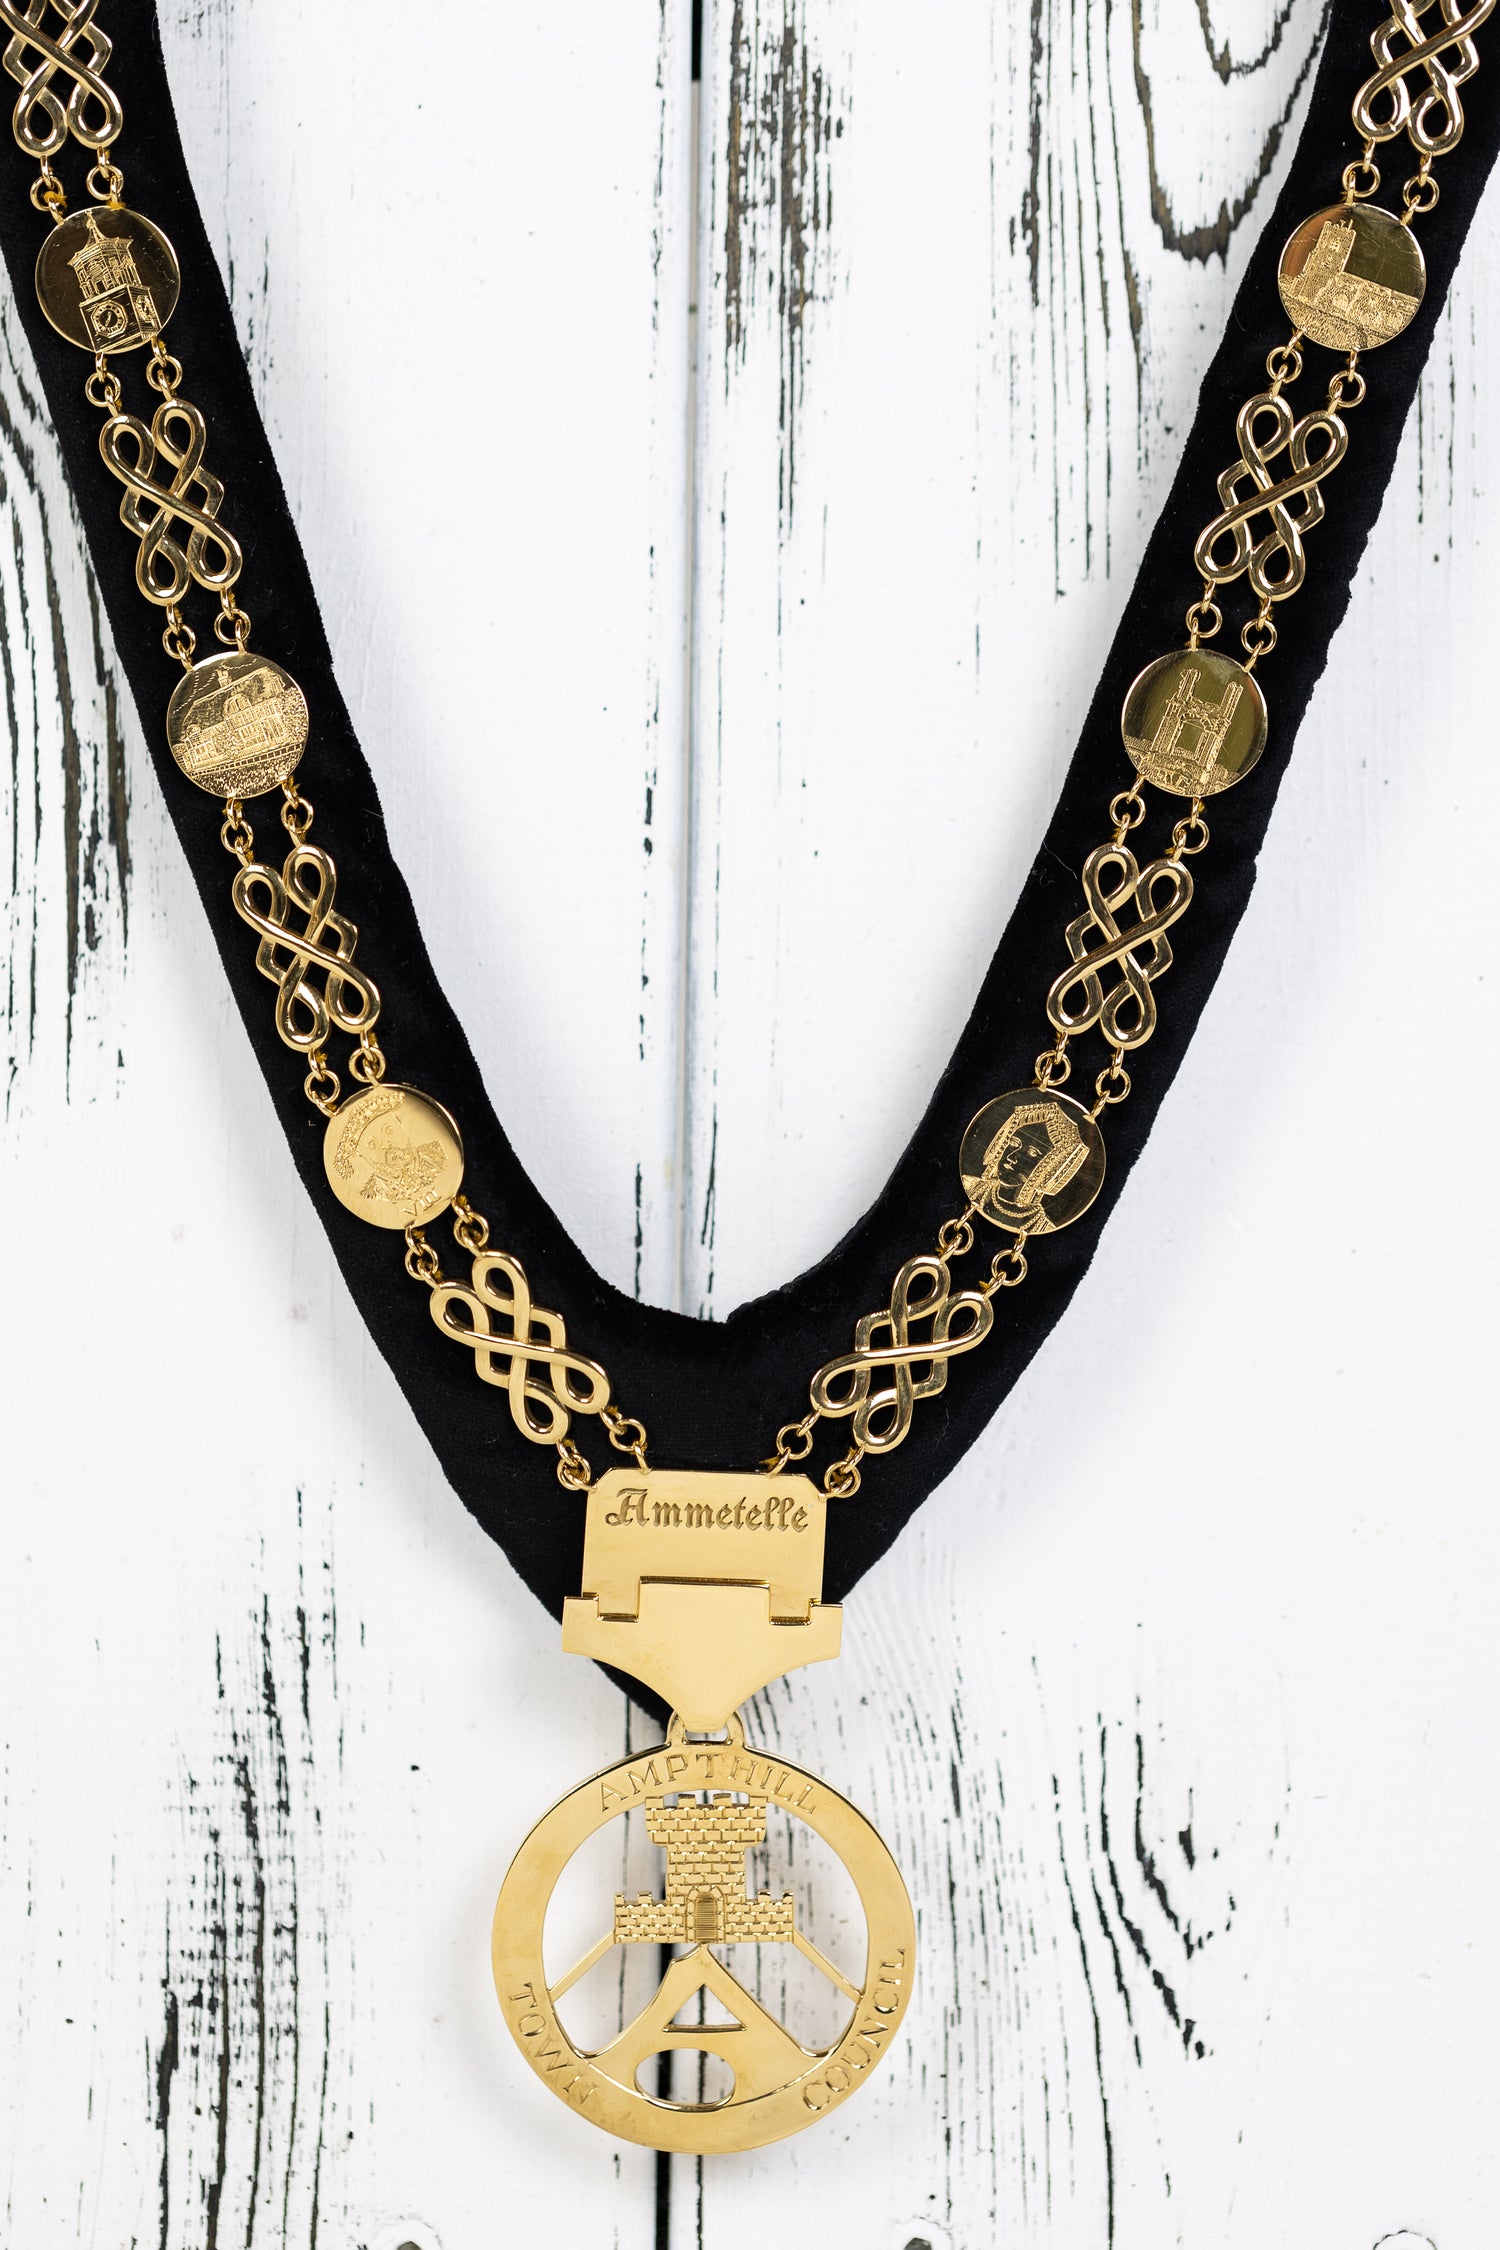 Mayoral chain manufactured by Nash Jewellery Innovation